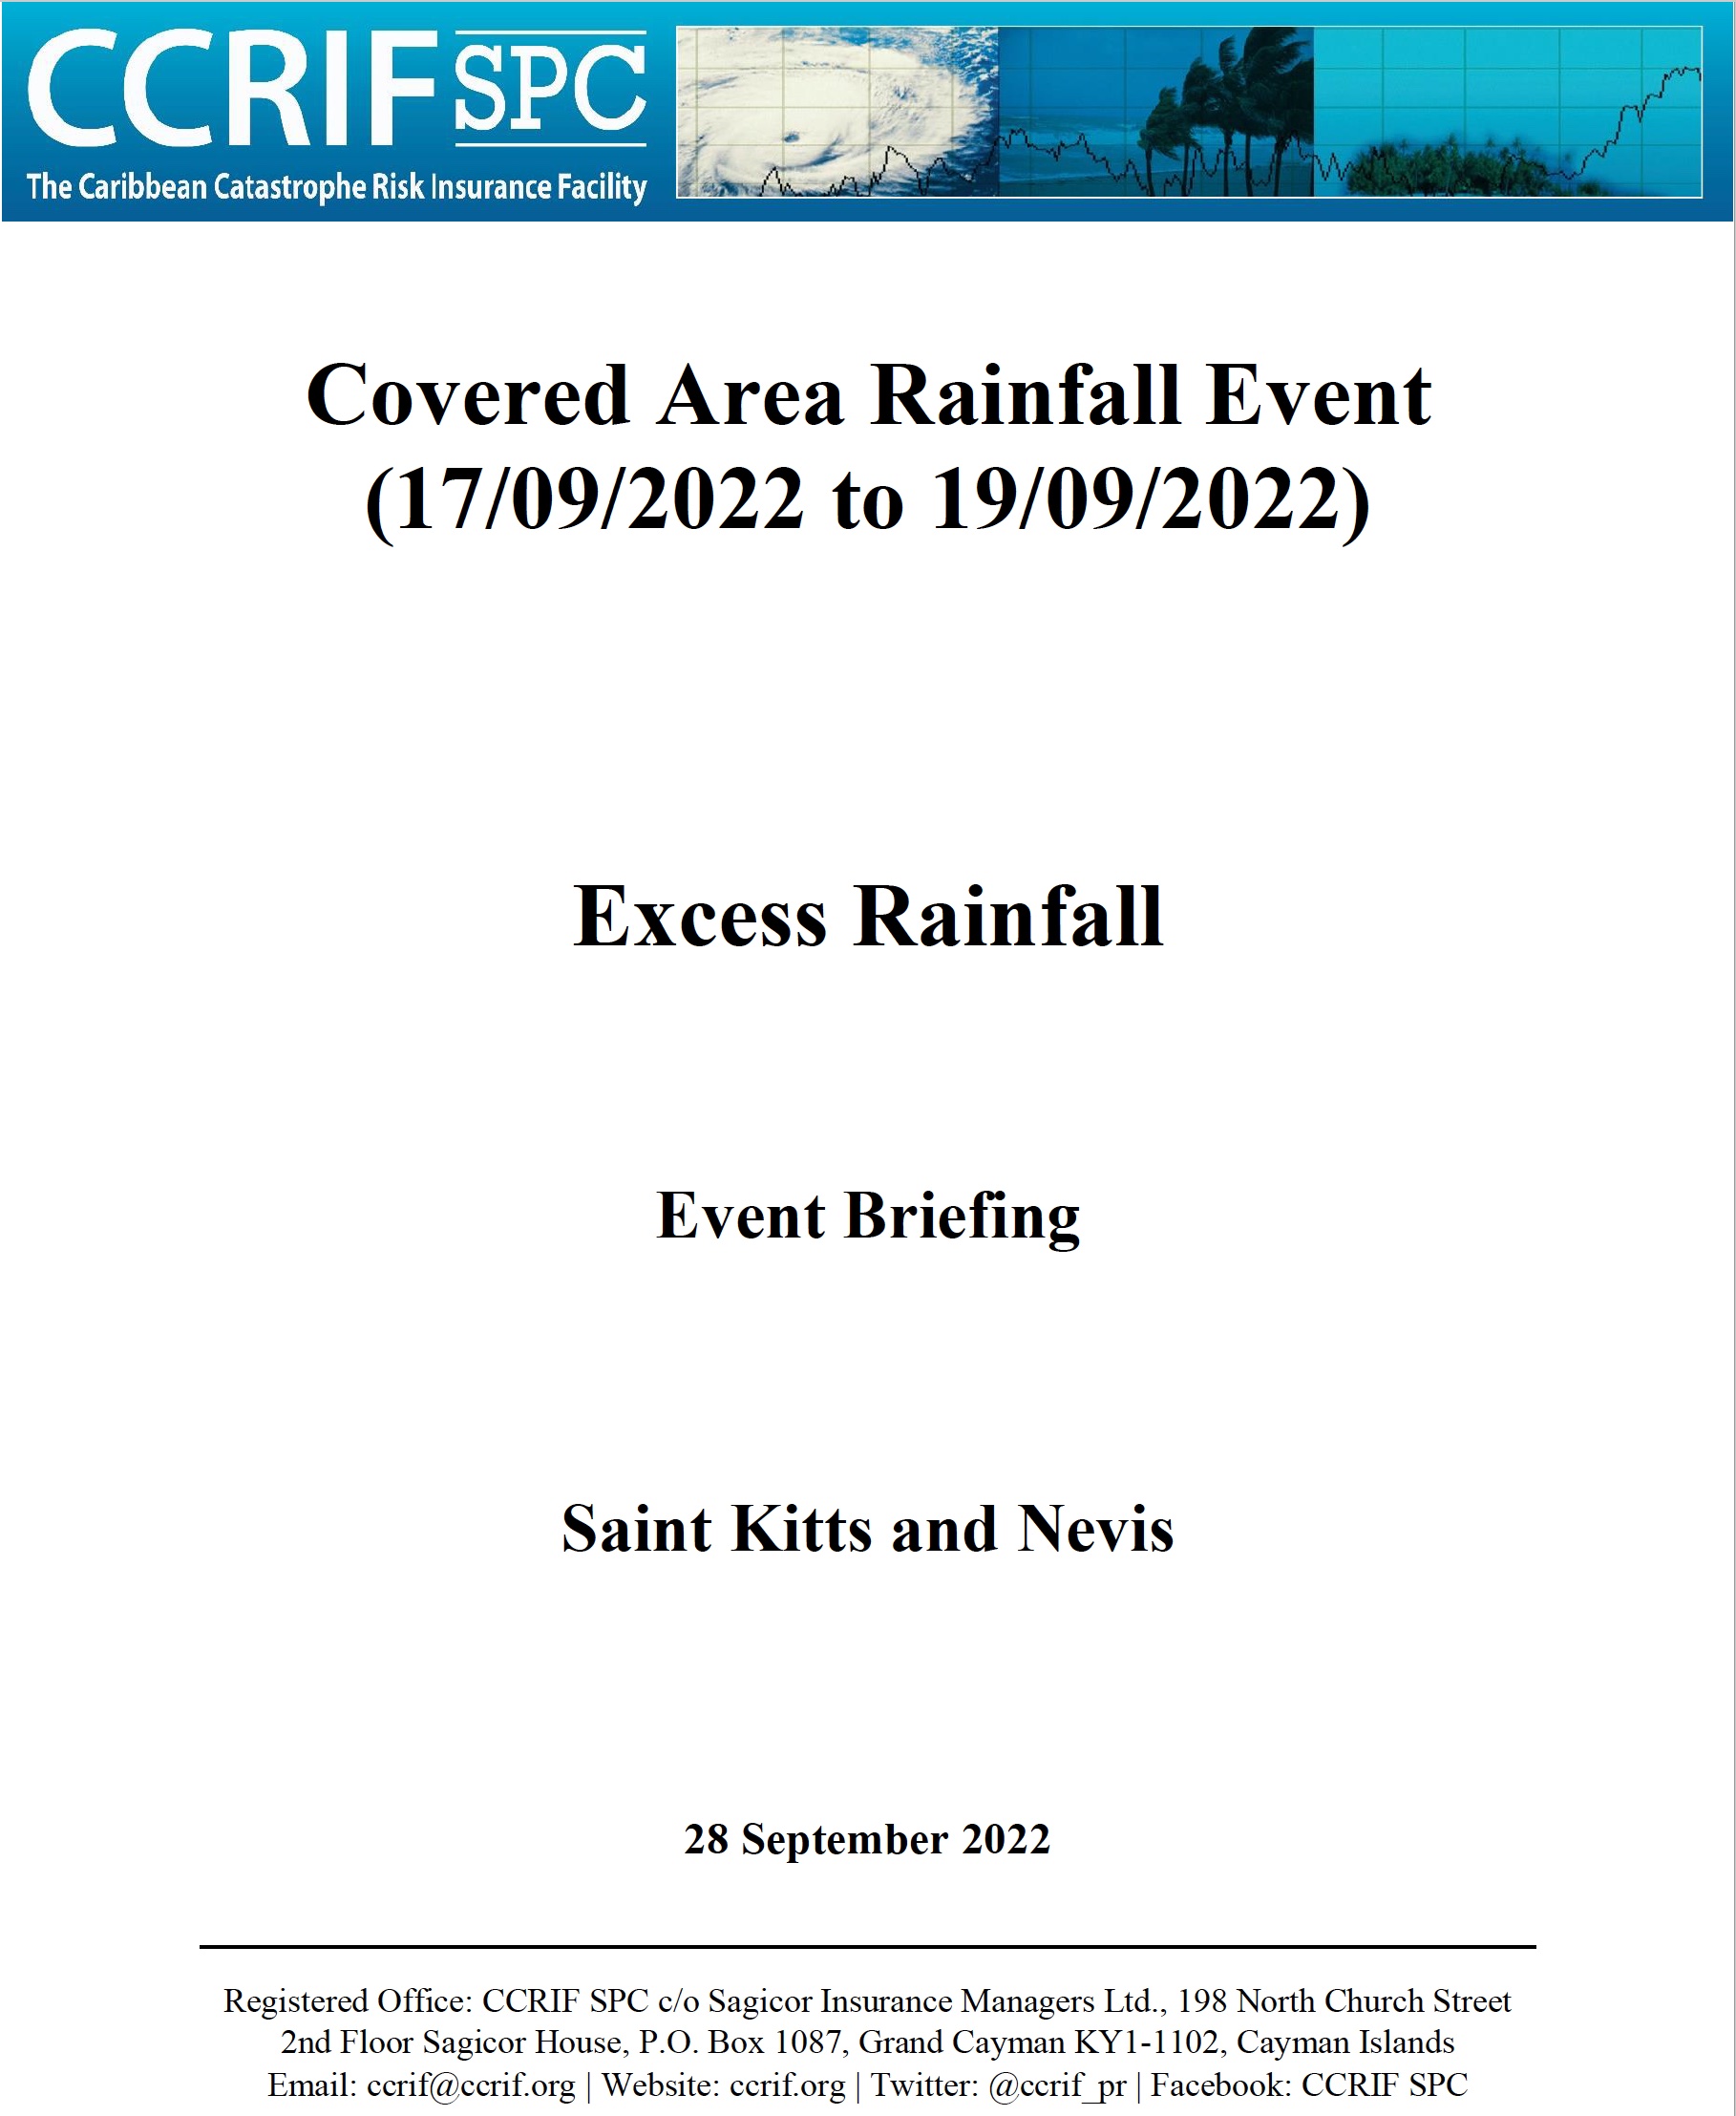 Event Briefing - Excess Rainfall - Covered Area Rainfall Event - Saint Kitts and Nevis - September 28 2022